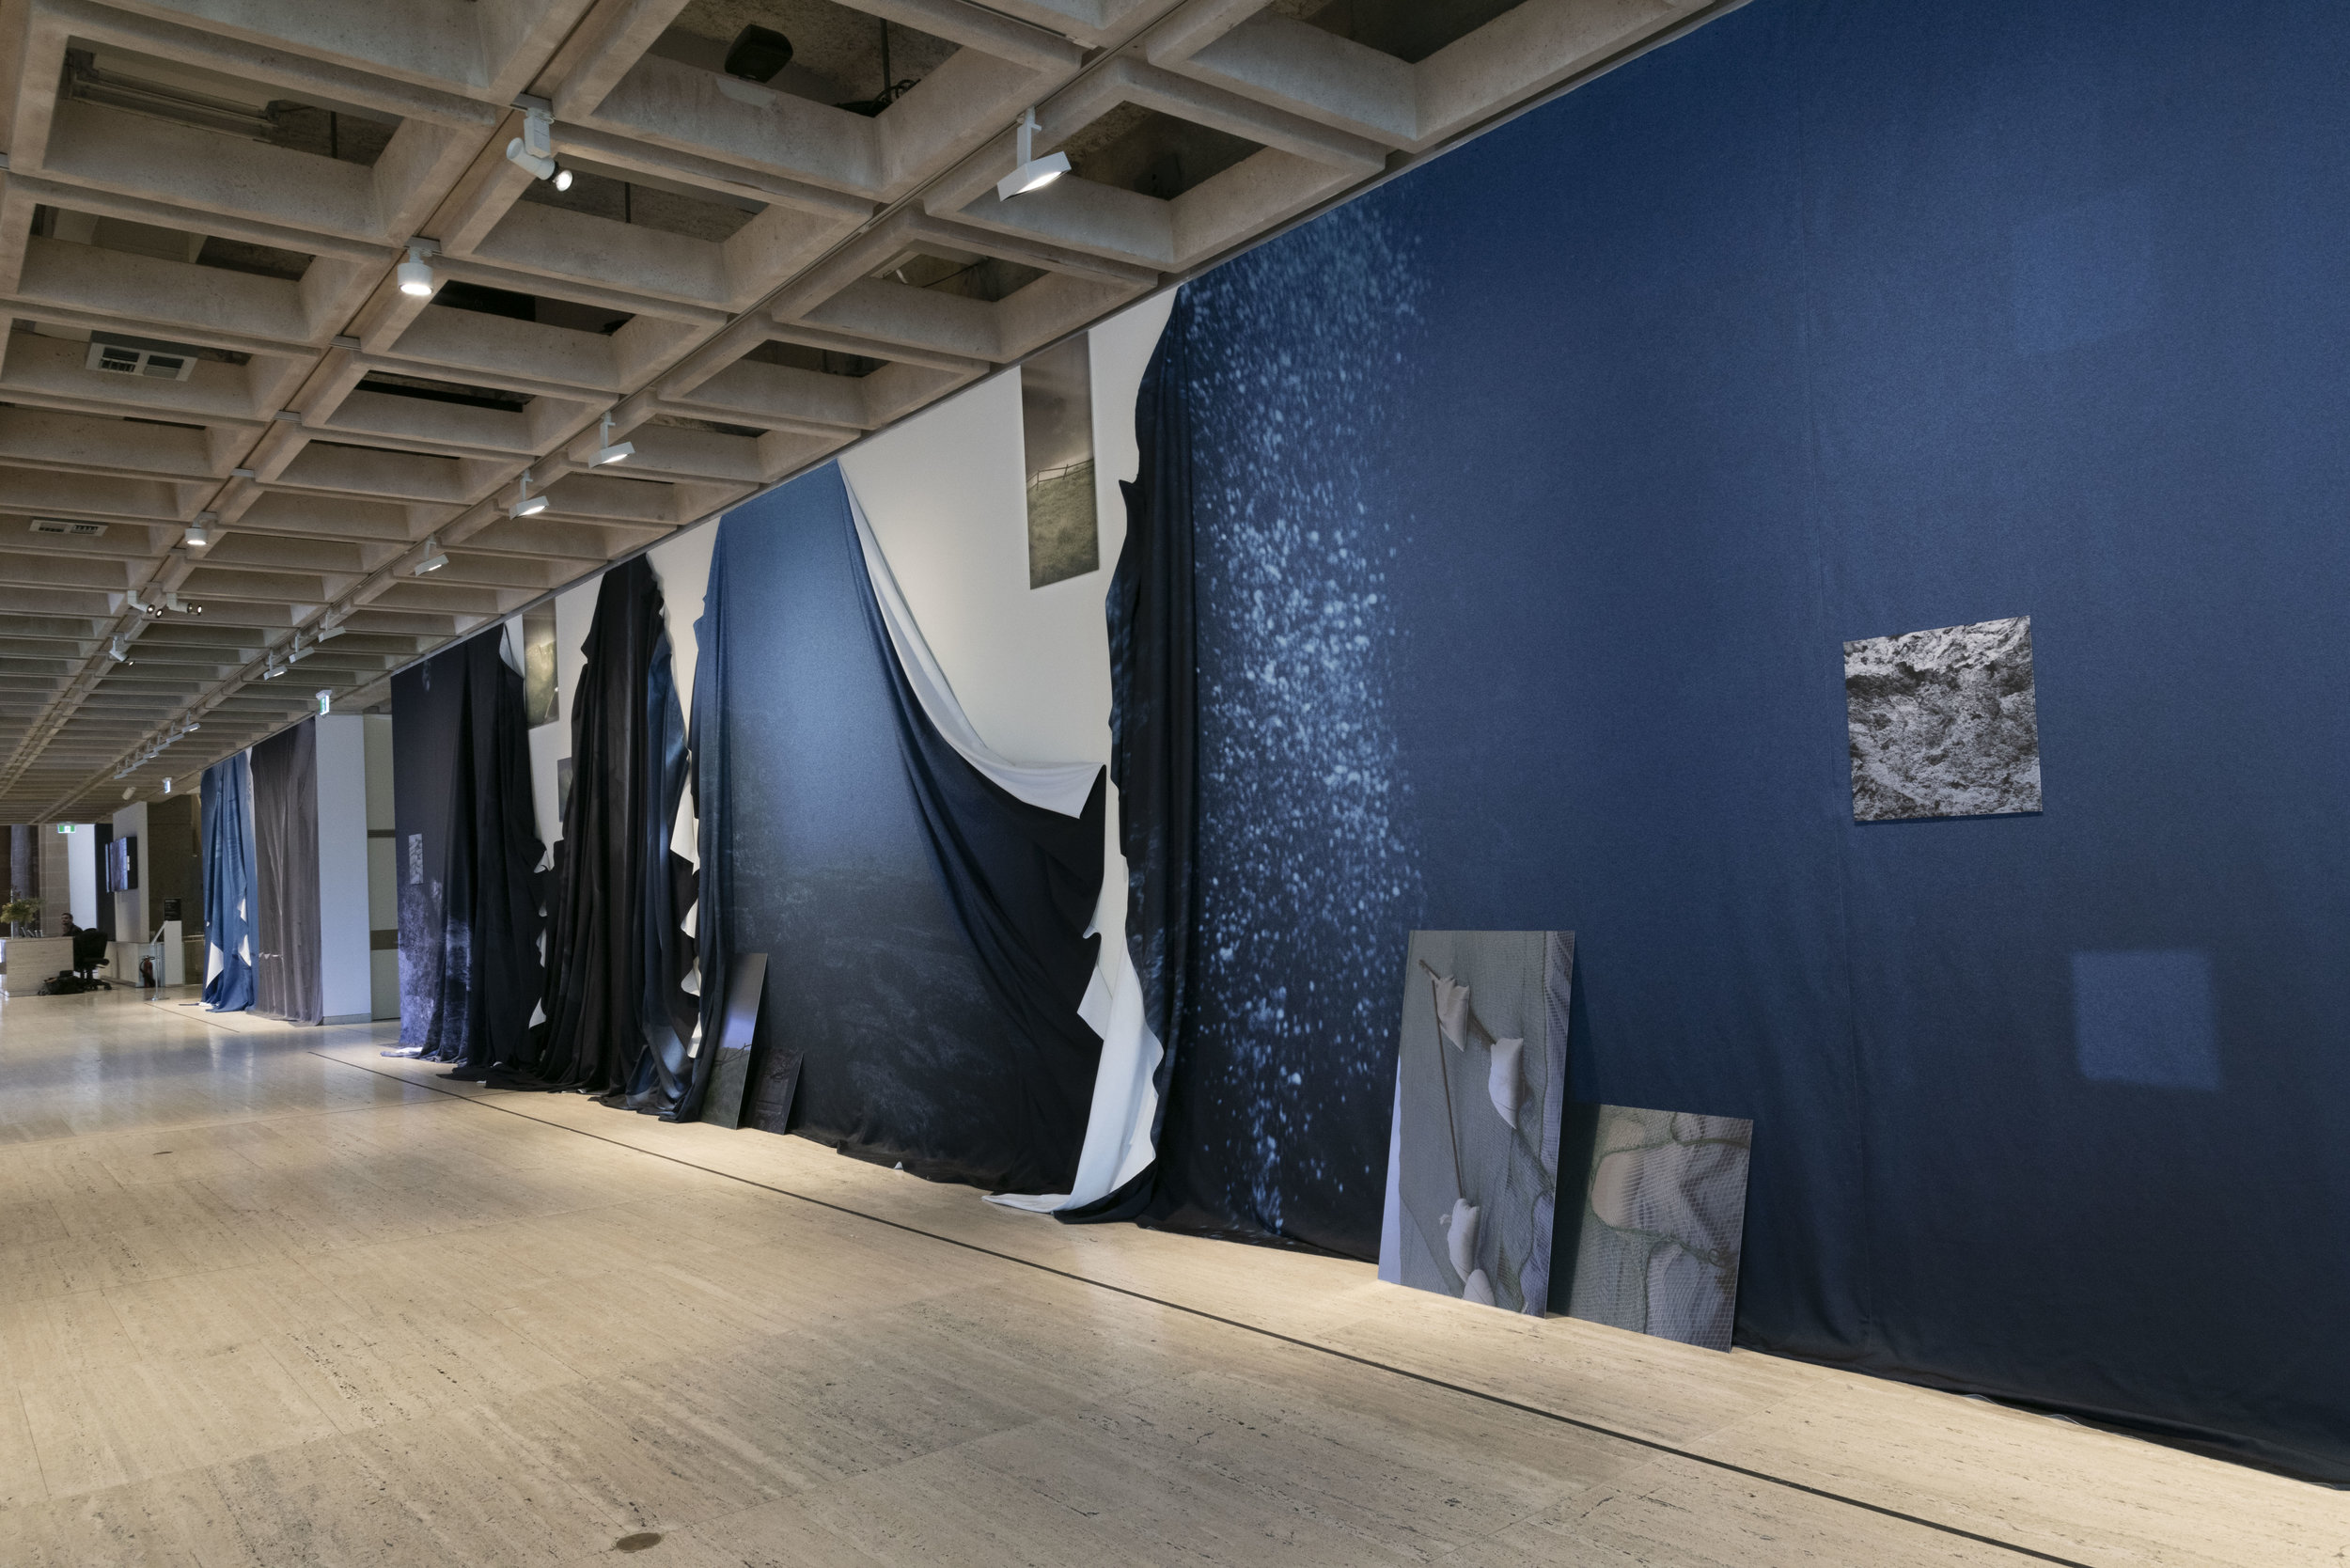    Apparent distance   2019  dye-sublimation prints on fabric and photographic prints on aluminium  340 x 850 cm, 340 x 2059 cm  installation view 